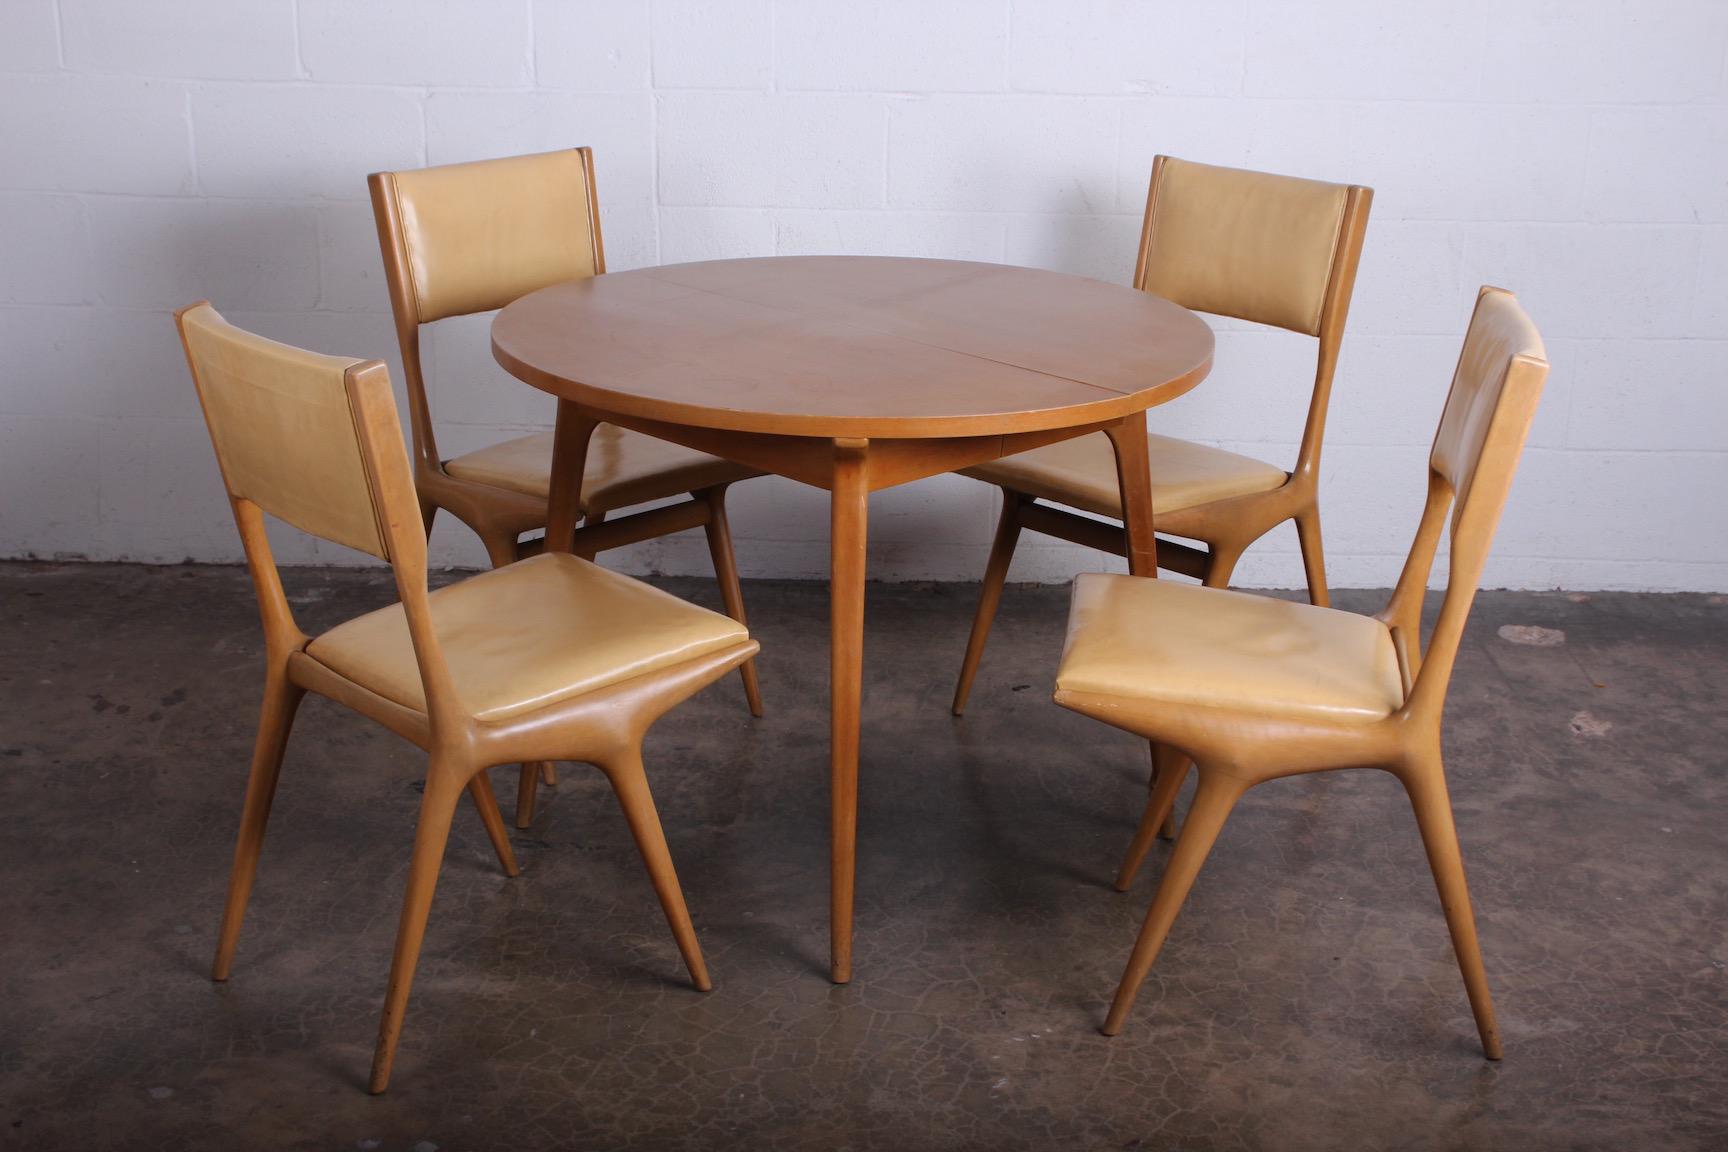 A set of four chairs by Carlo de Carli for Singer and Sons in original bleached finish with original leather.